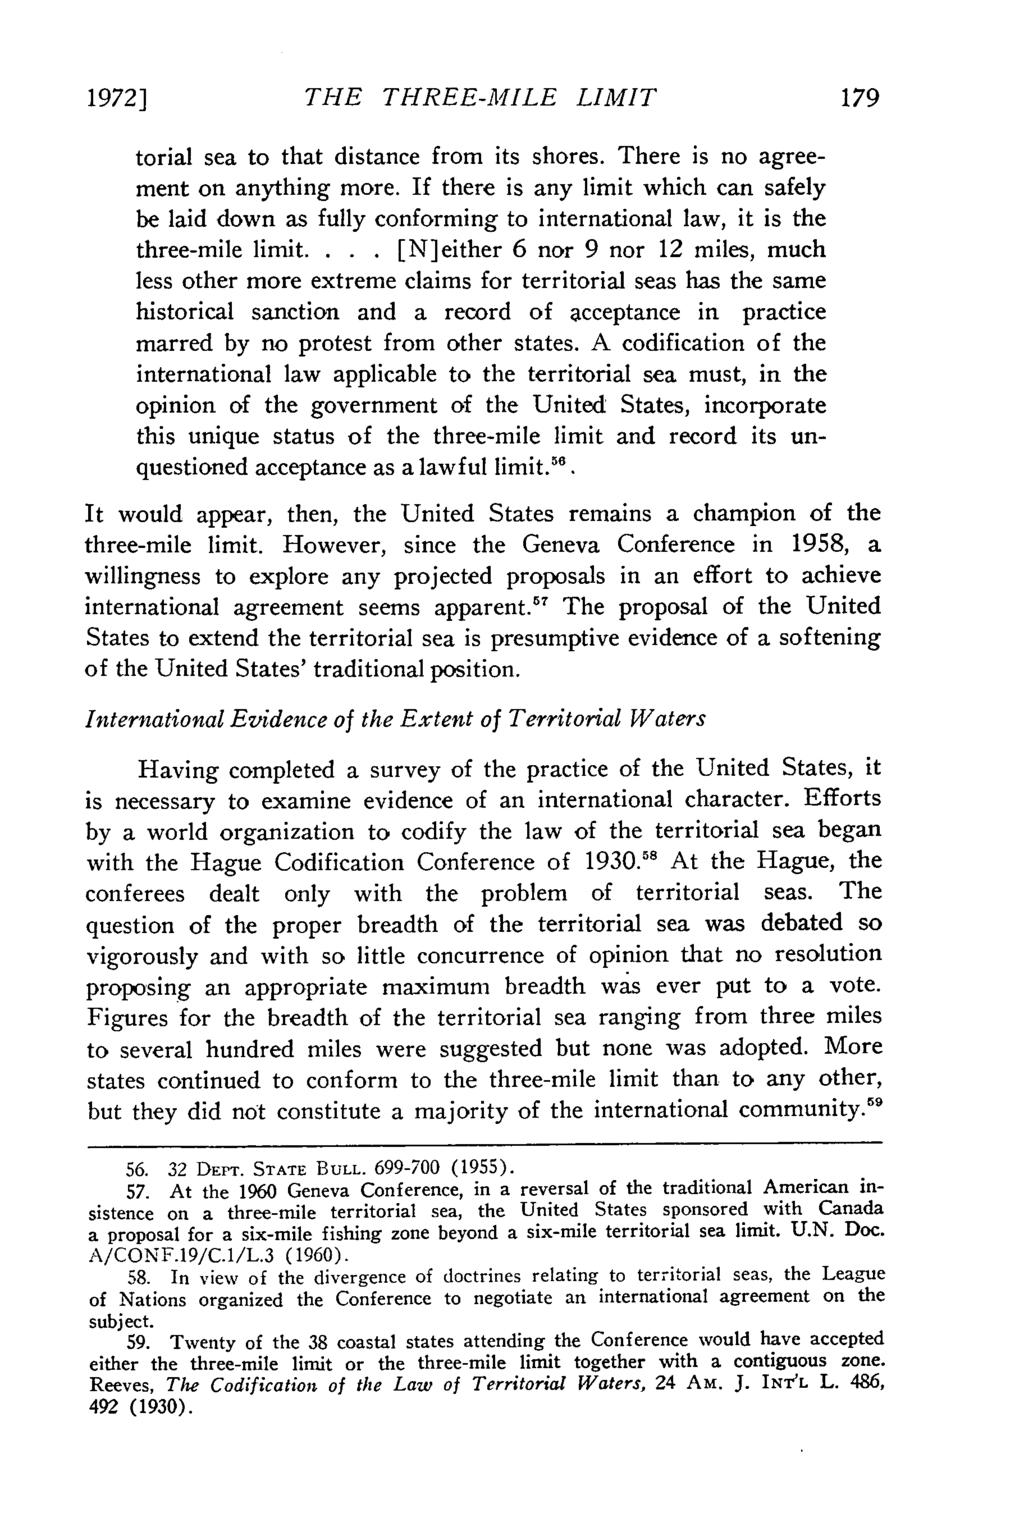 1972] Valparaiso University Law Review, Vol. 6, No. 2 [1972], Art. 4 THE THREE-MILE LIMIT torial sea to that distance from its shores. There is no agreement on anything more.